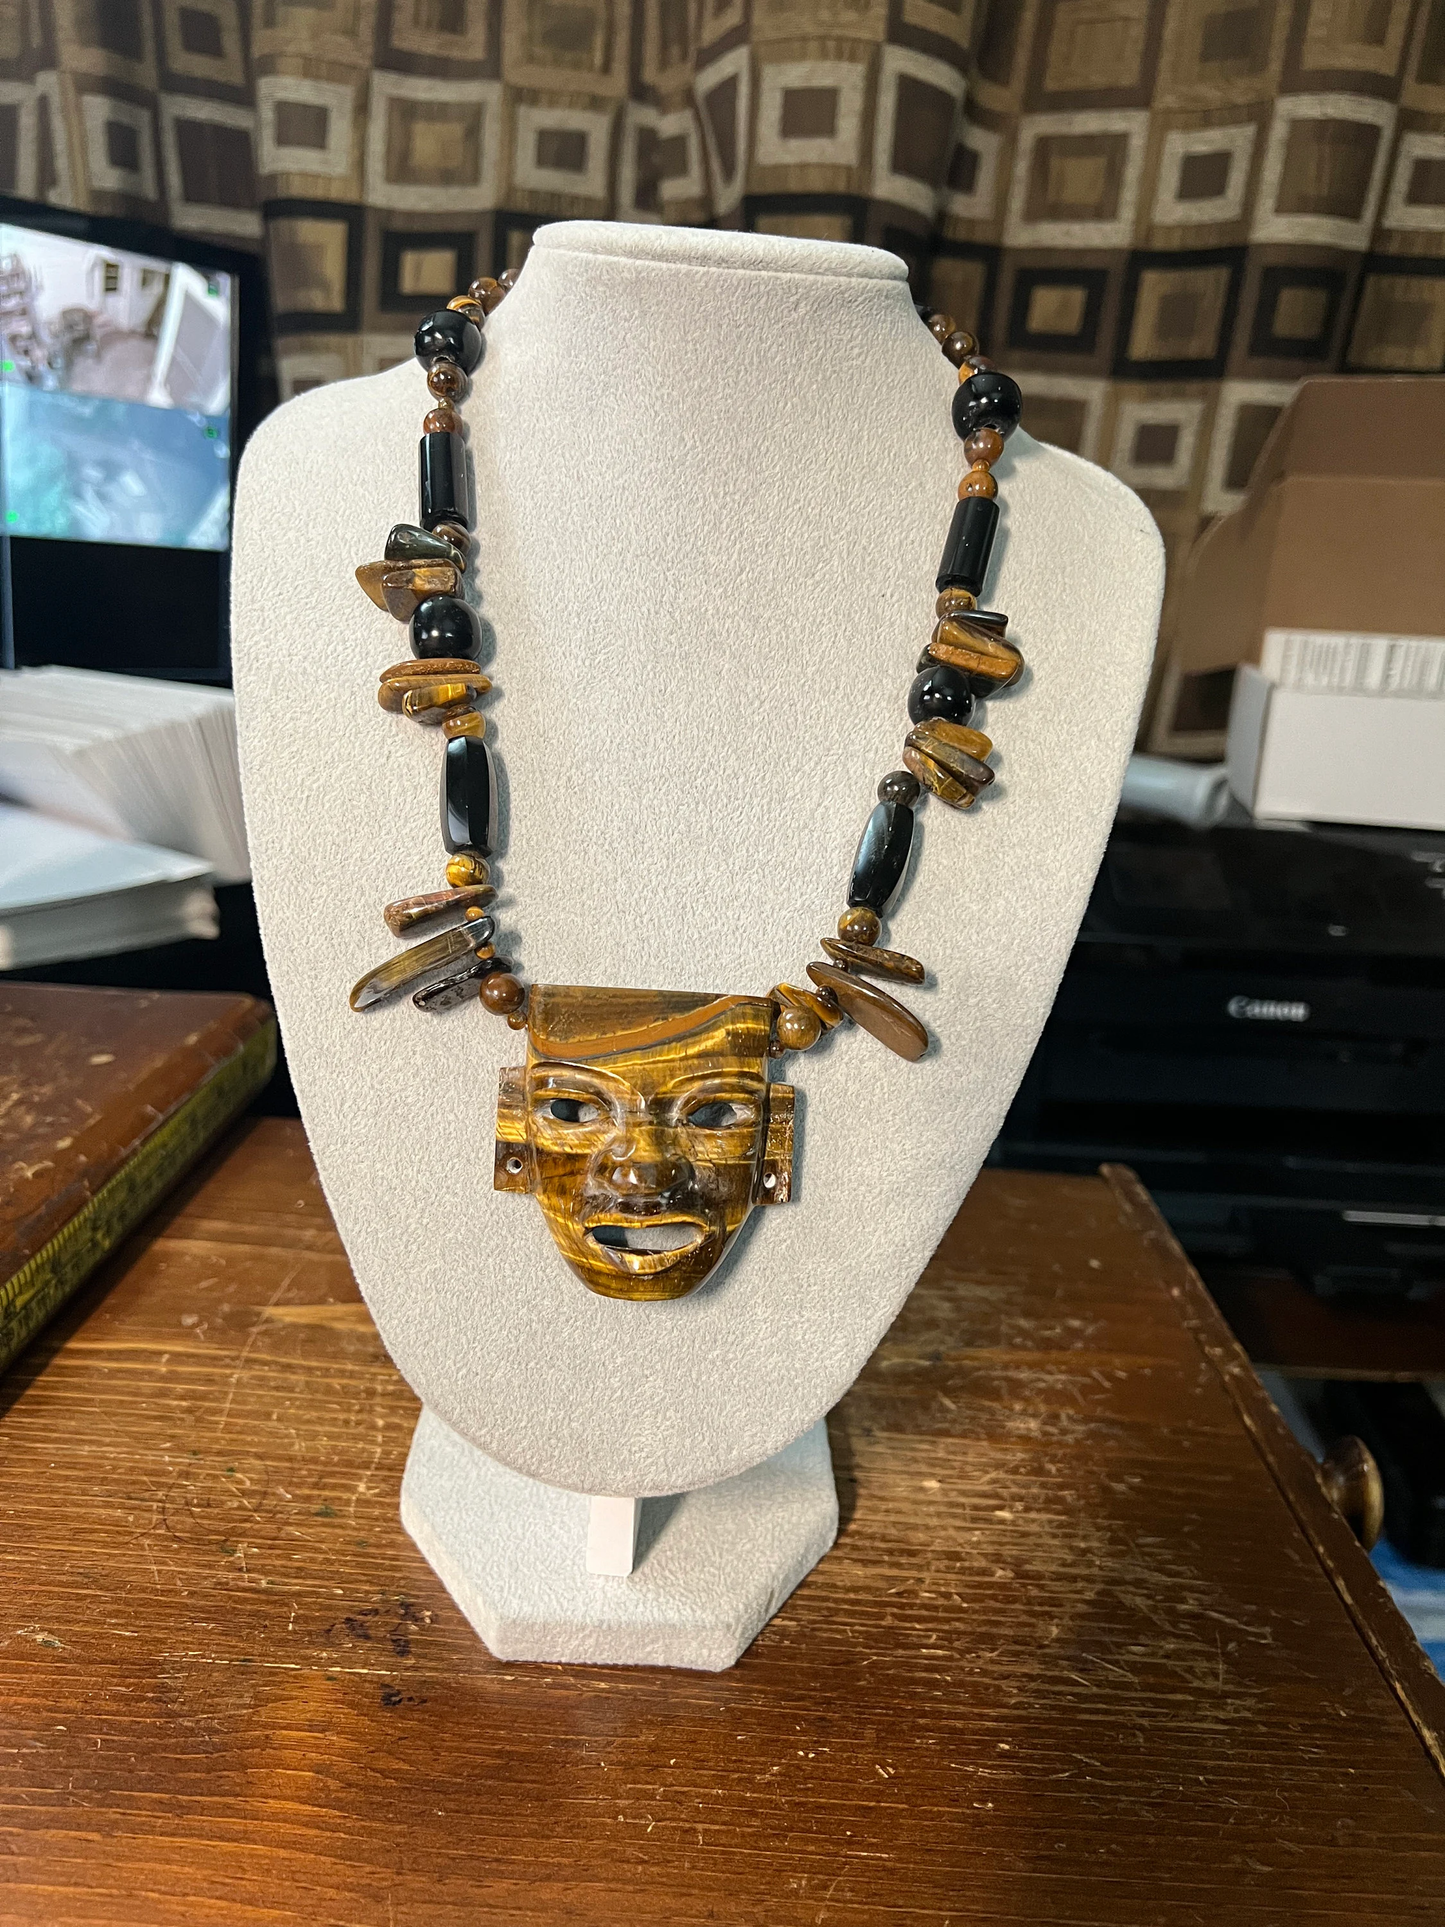 Large Teotihuacan Face Mask Tiger Eye Stone Pendant Necklace, 20", Obsidian Beads, Handmade, Ritual Necklace Rare, Golden, Aztec, Maya (#15)